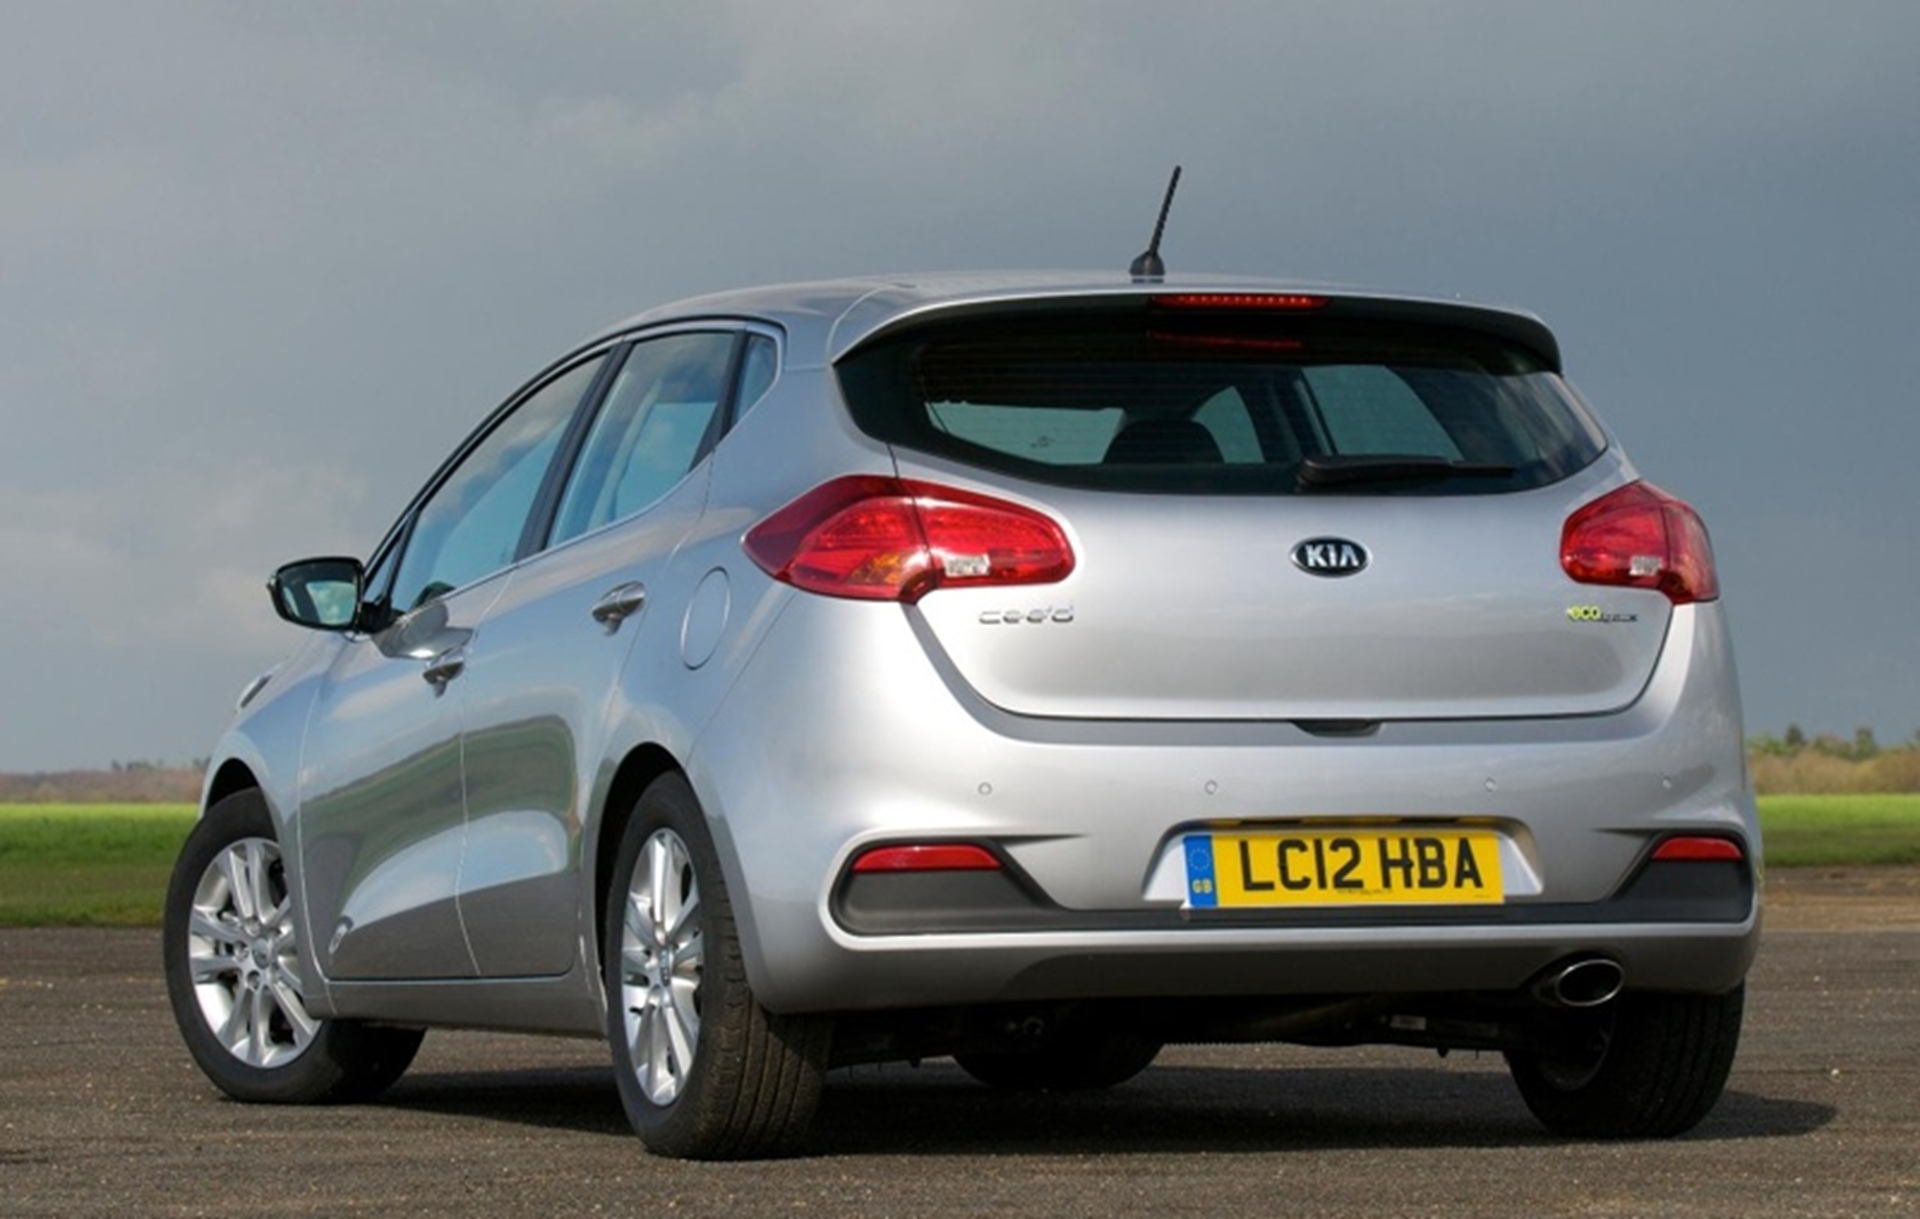 NEW KIA CEE’D ON SALE IN THE UK